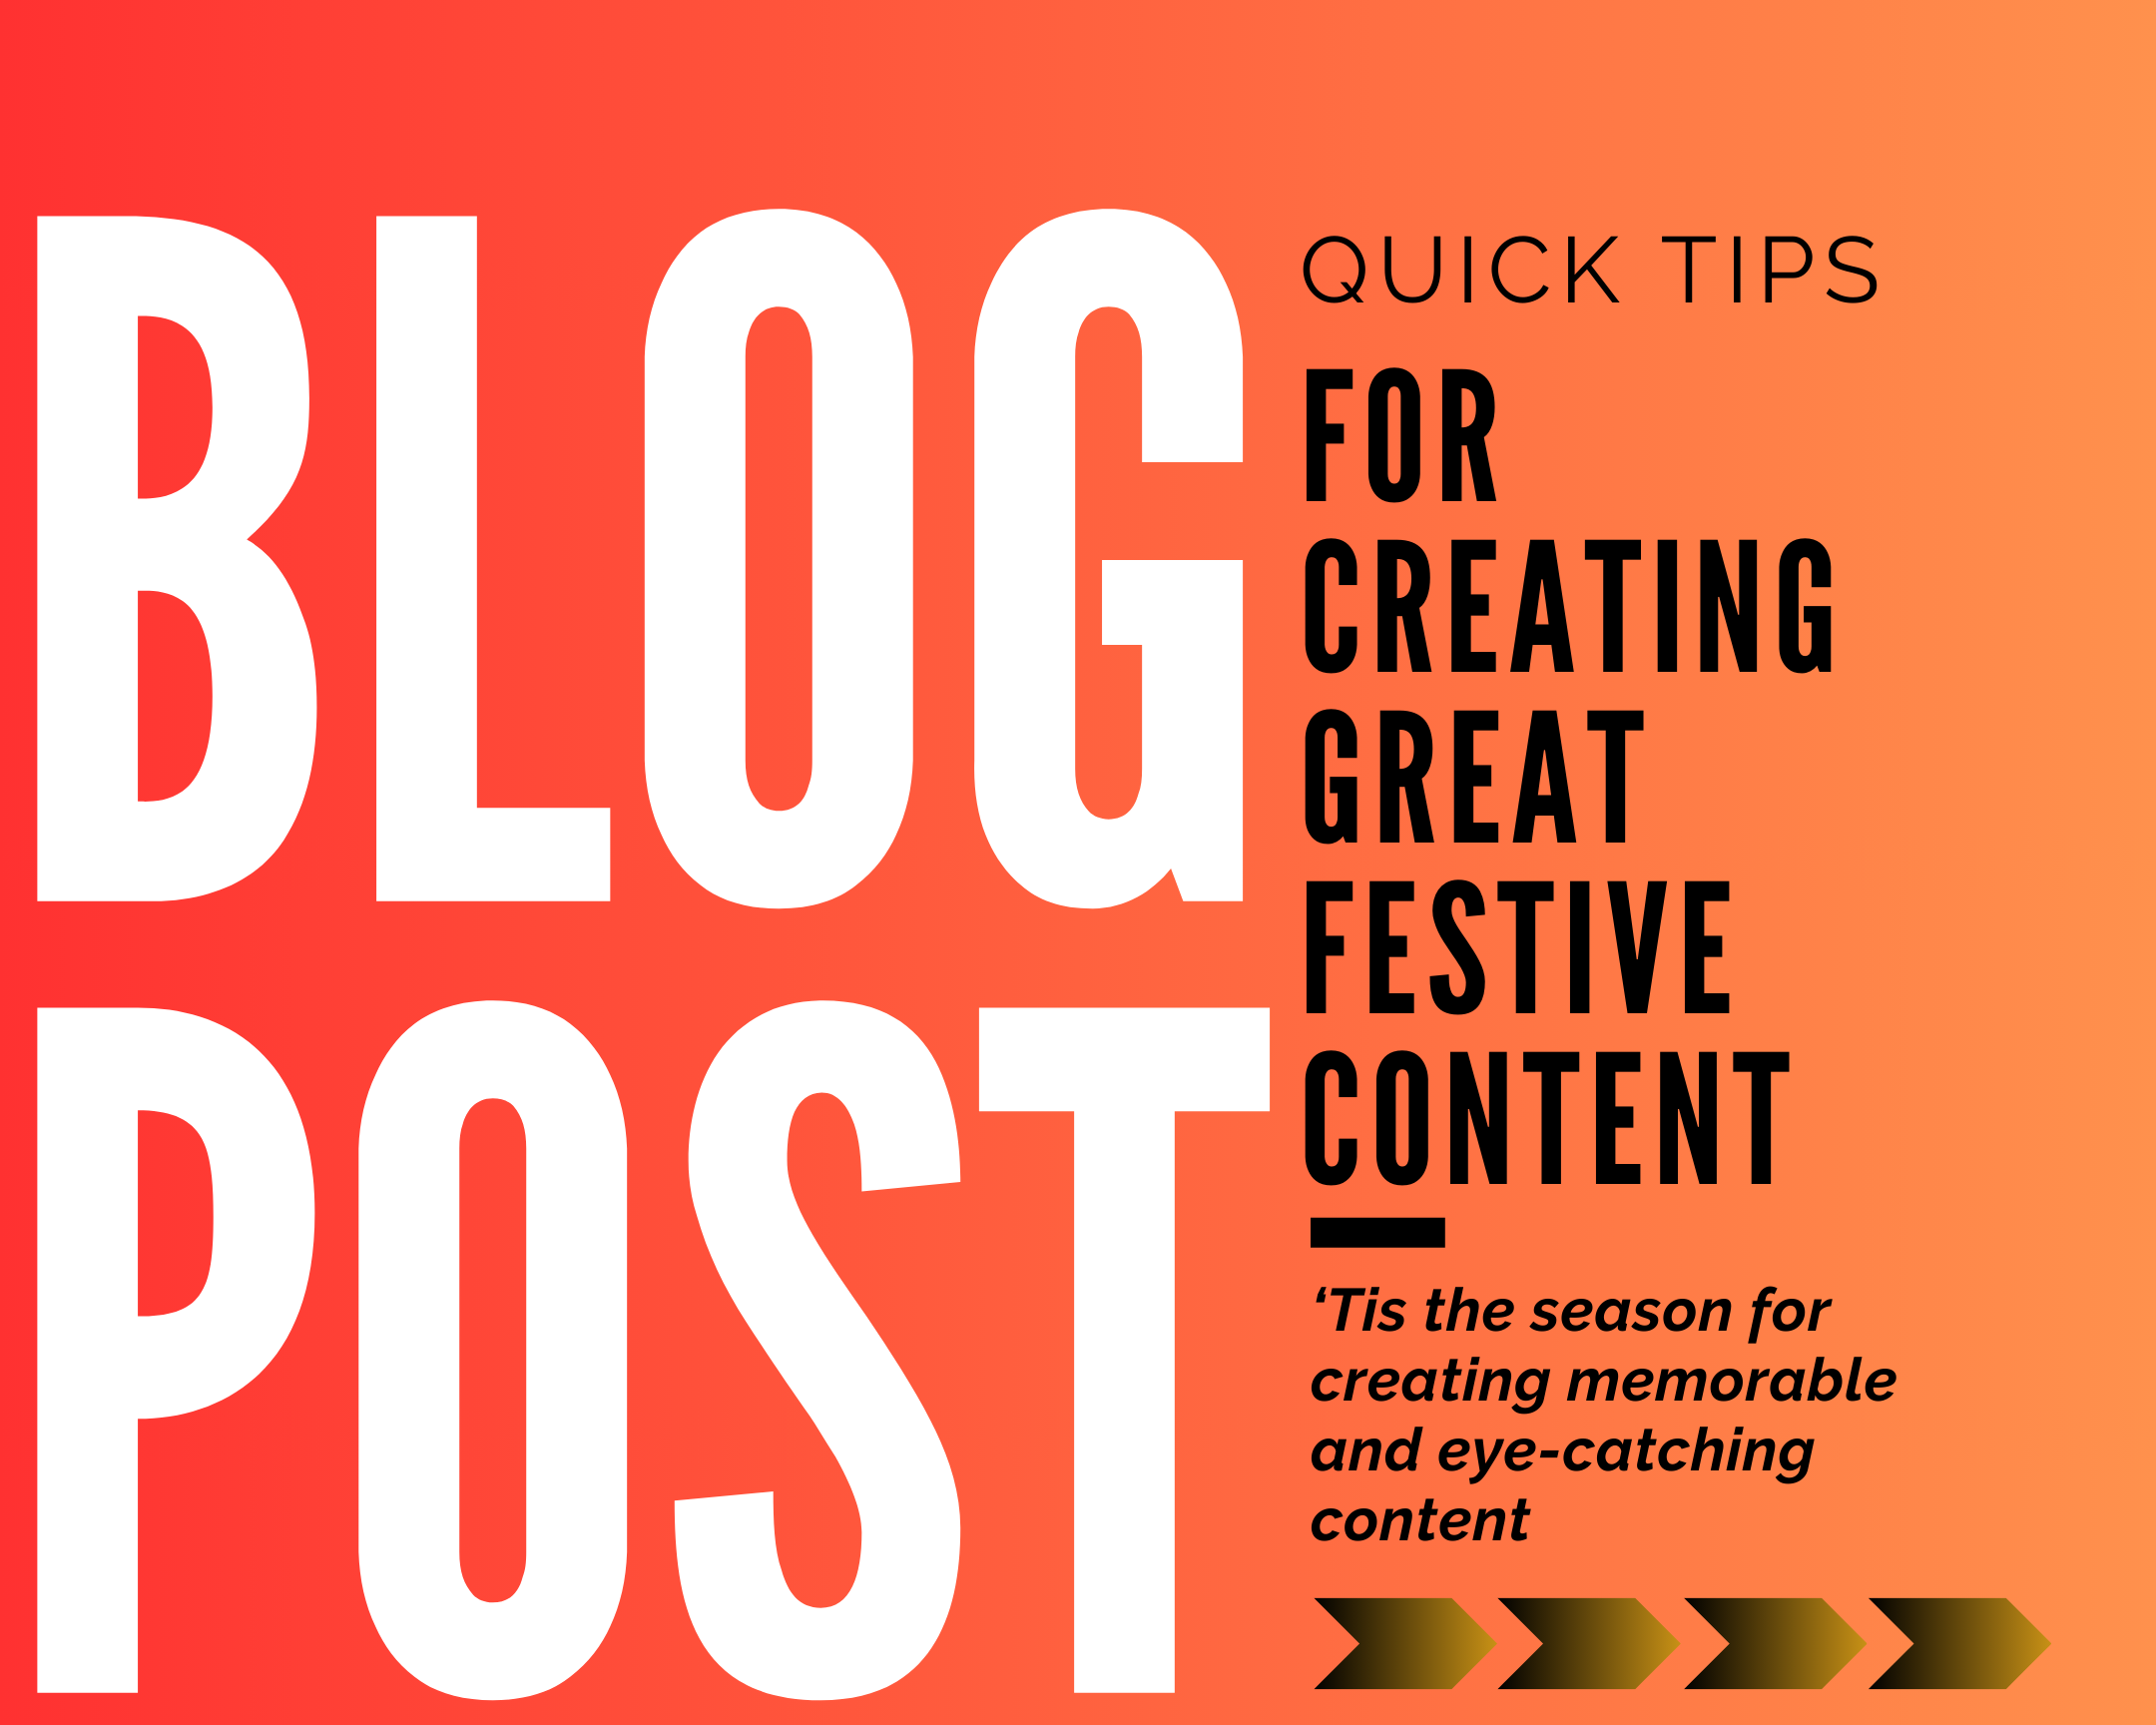 Quick tips for creating great Festive content